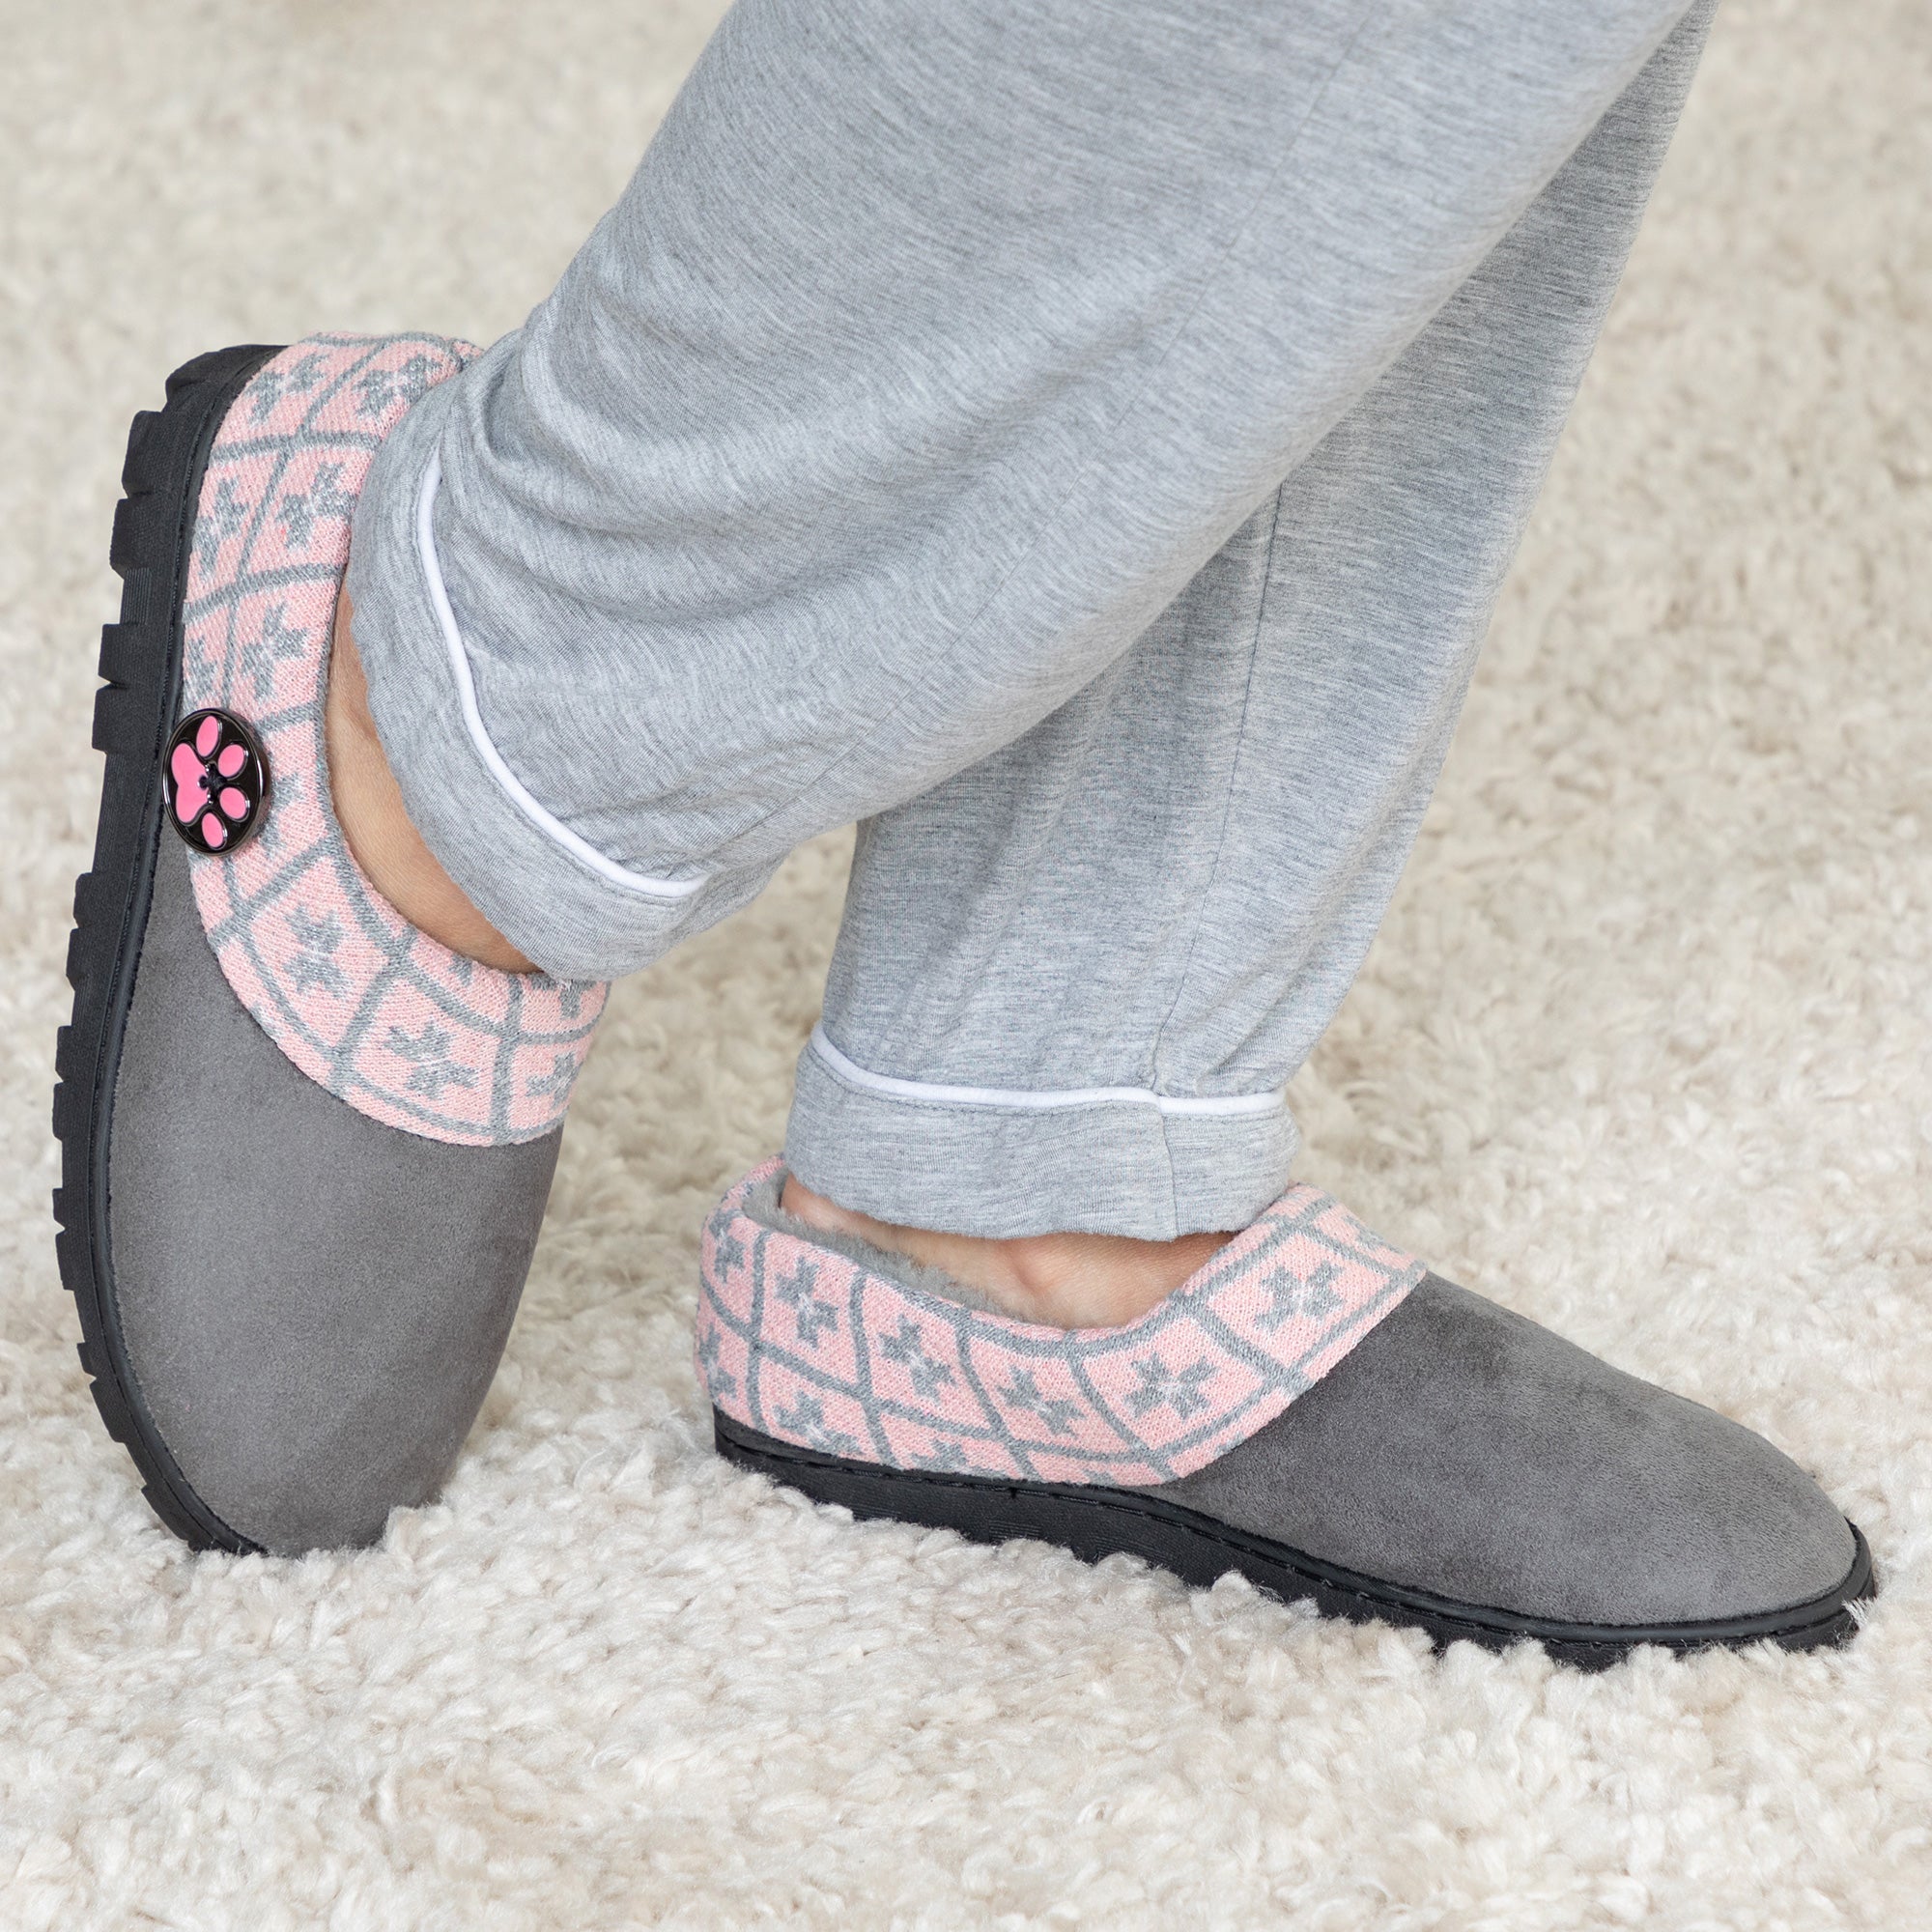 Purple Paw Women's Comfy Clog Slippers - Pink/Gray - 8